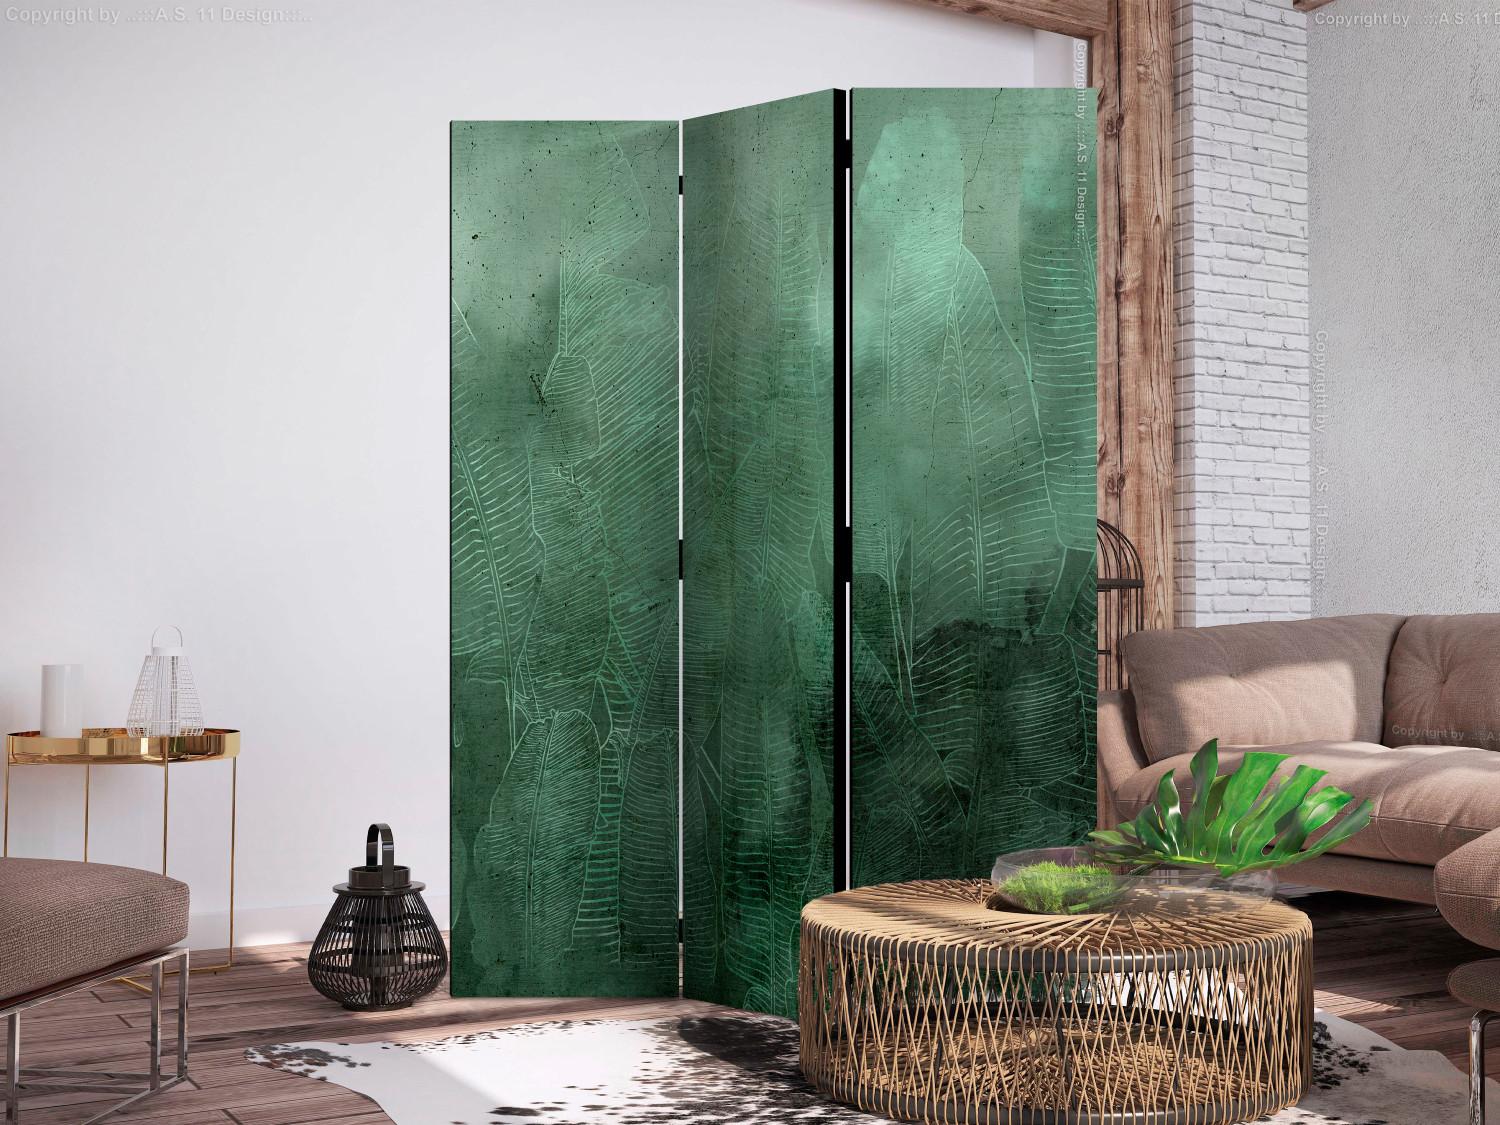 Room Divider Green Banana Trees (3-piece) - Emerald composition in leaves